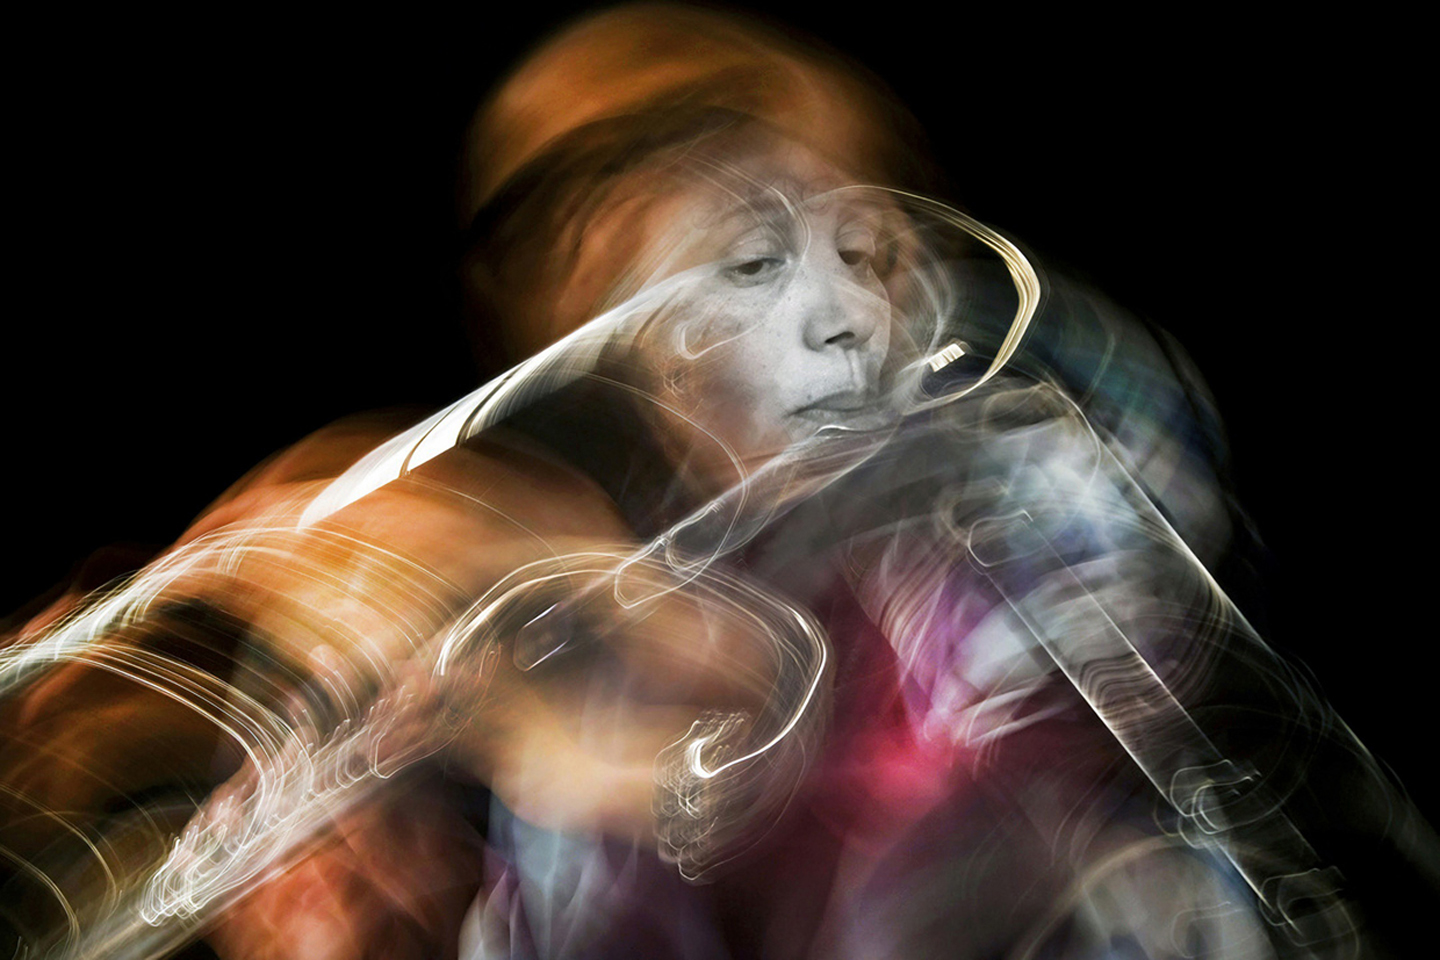 A woman playing a flute sits at the center, with swirls of incandescence emanating from her flute